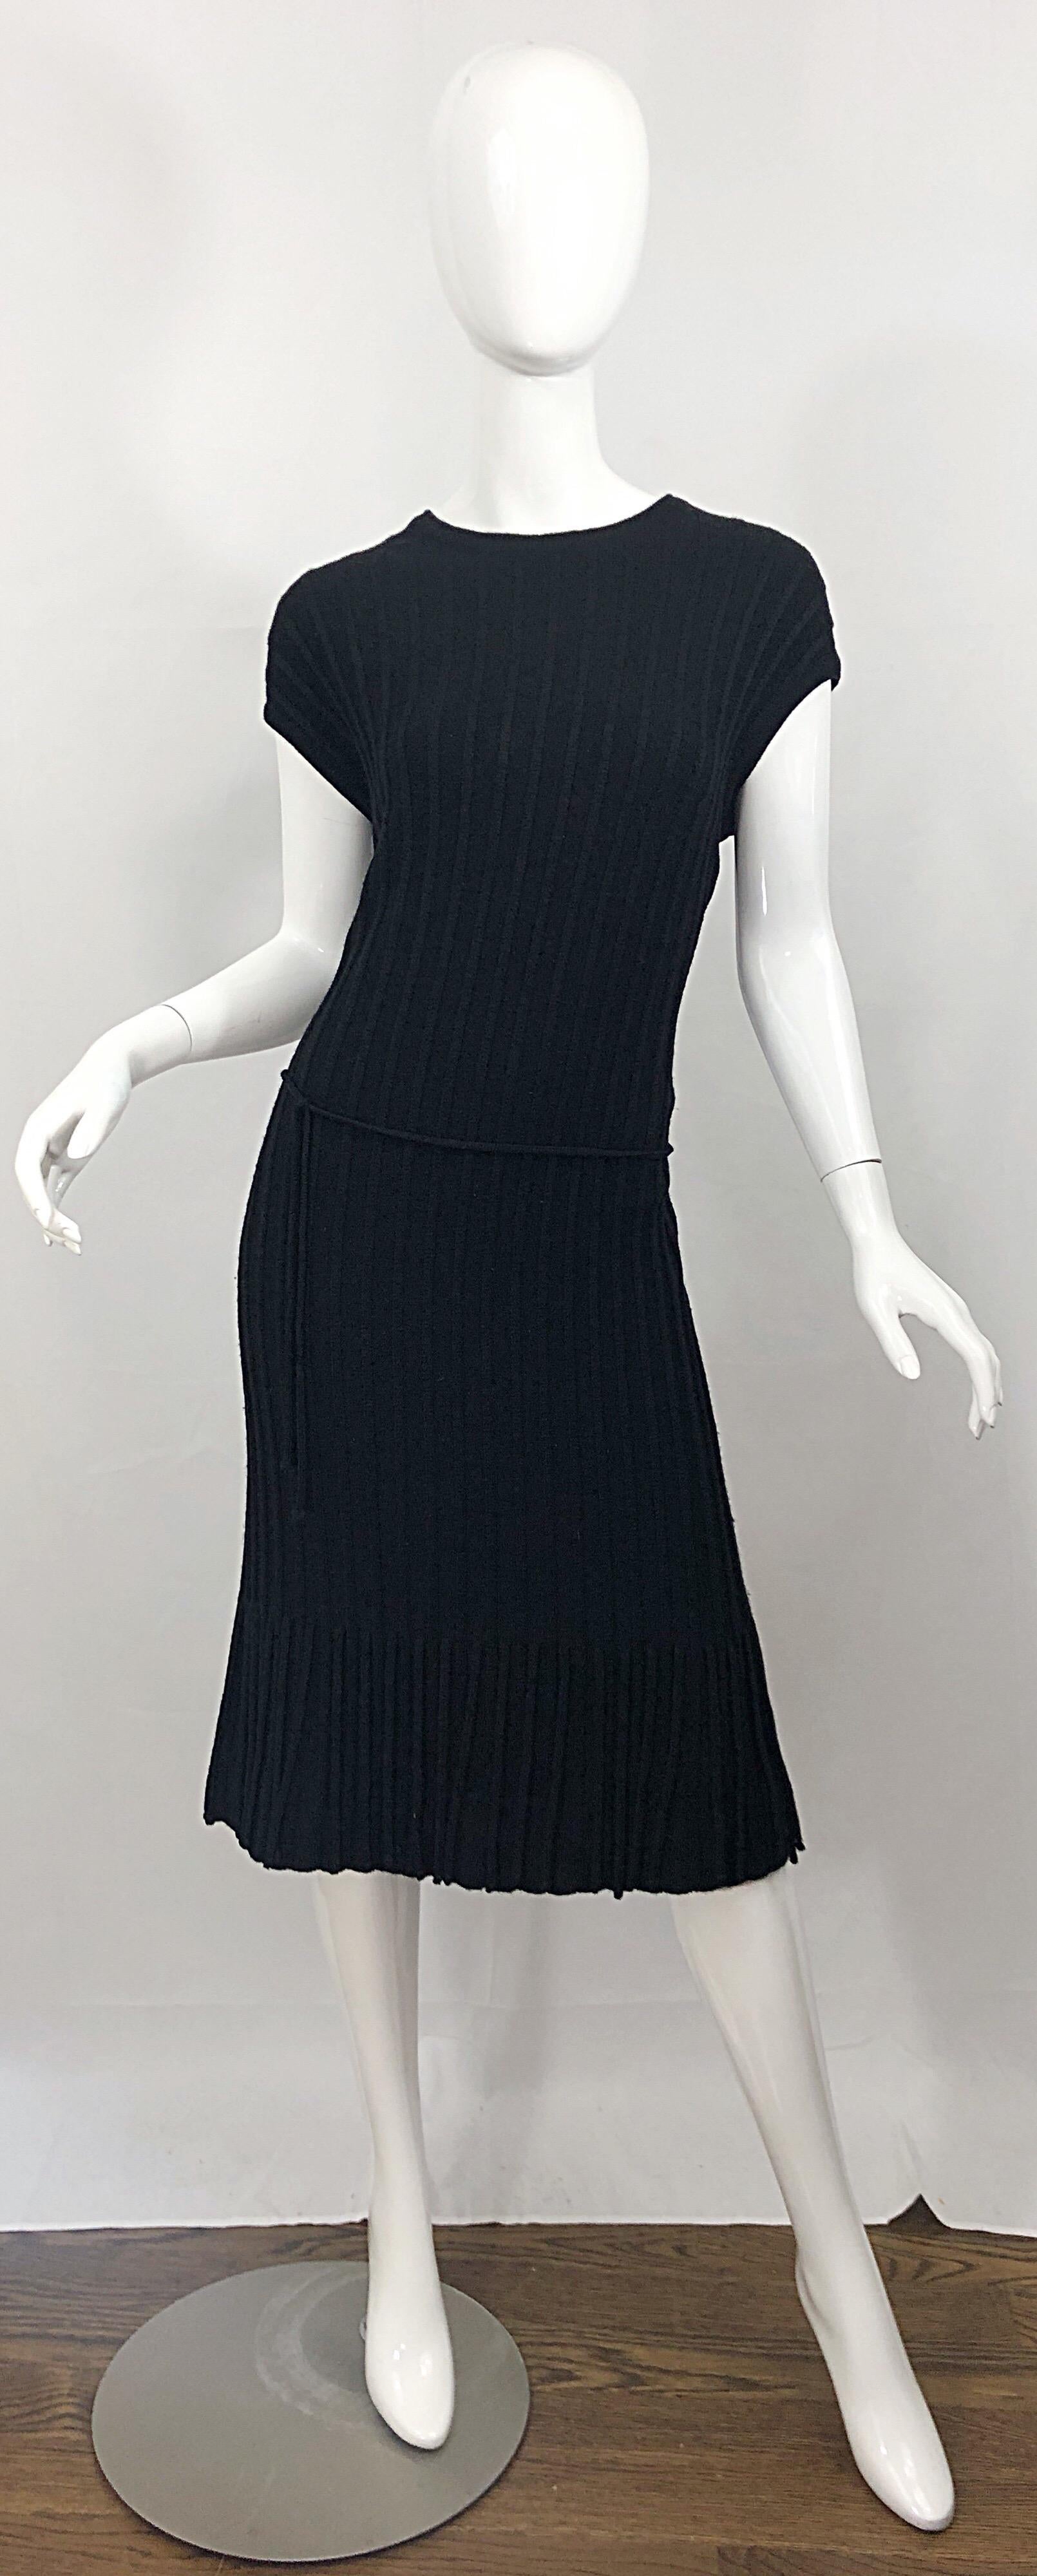 Fantastic vintage 60s OLEG CASSINI black virgin wool larger size Italian made carwash hem dress! Photos do not do this rare beauty justice. Features wool fringe along the entire hem on the front and back. Detachable wool belt ties to adjust to waist